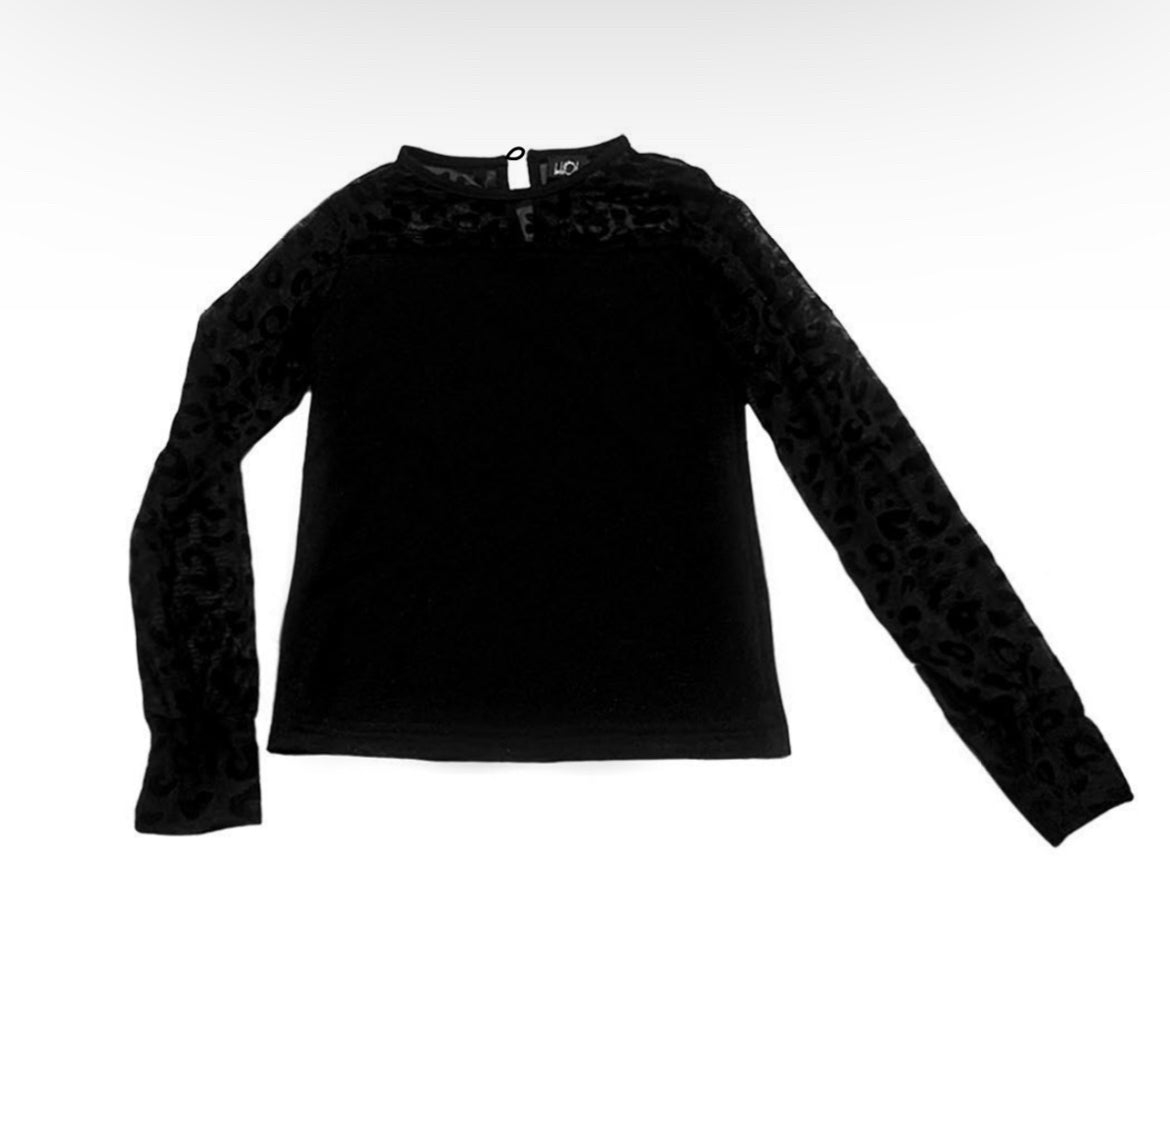 Black jersey top with leopard sleeves